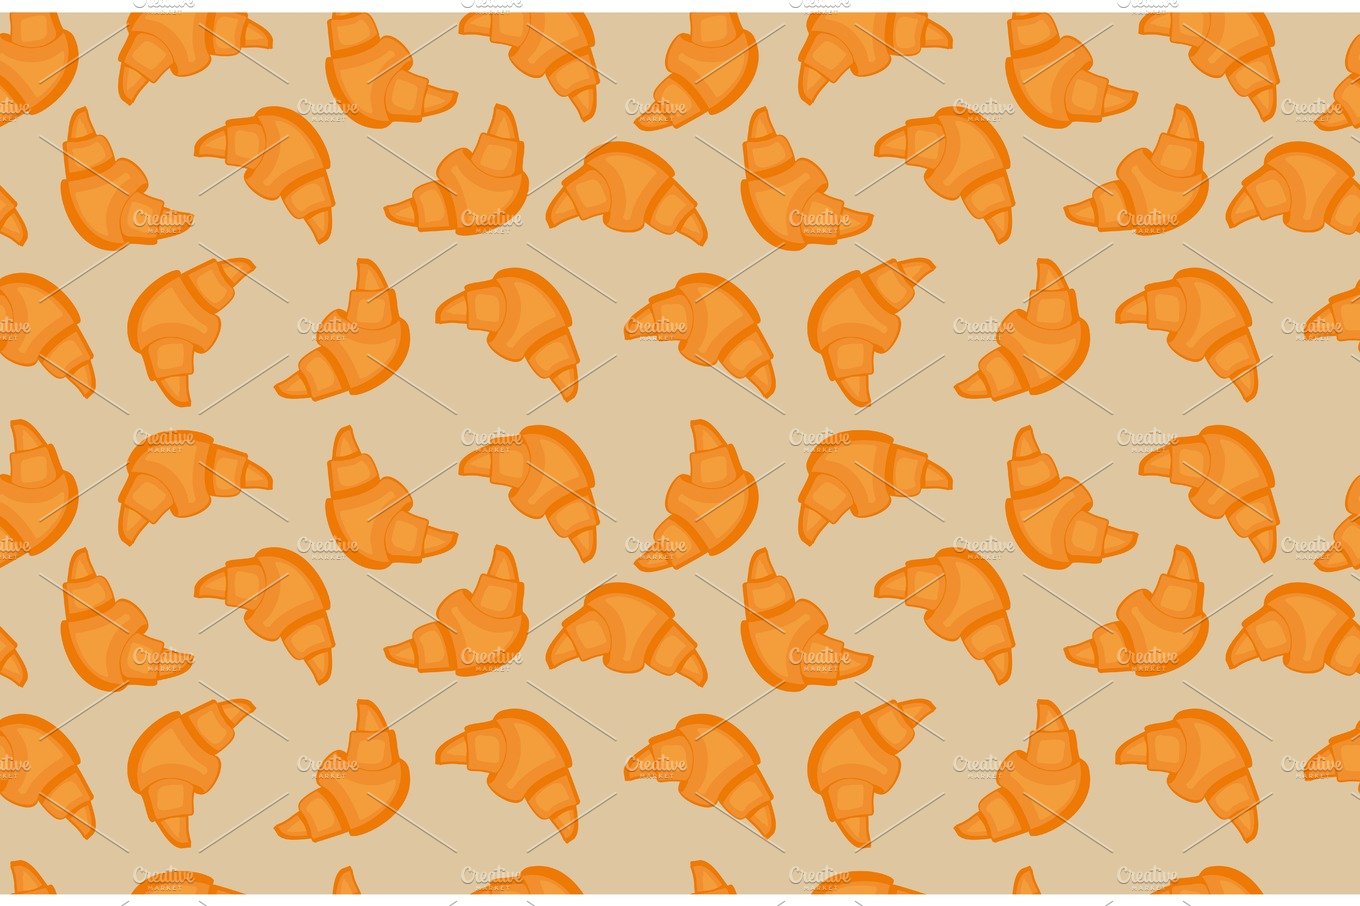 Seamless pattern with many delicious croissants cover image.